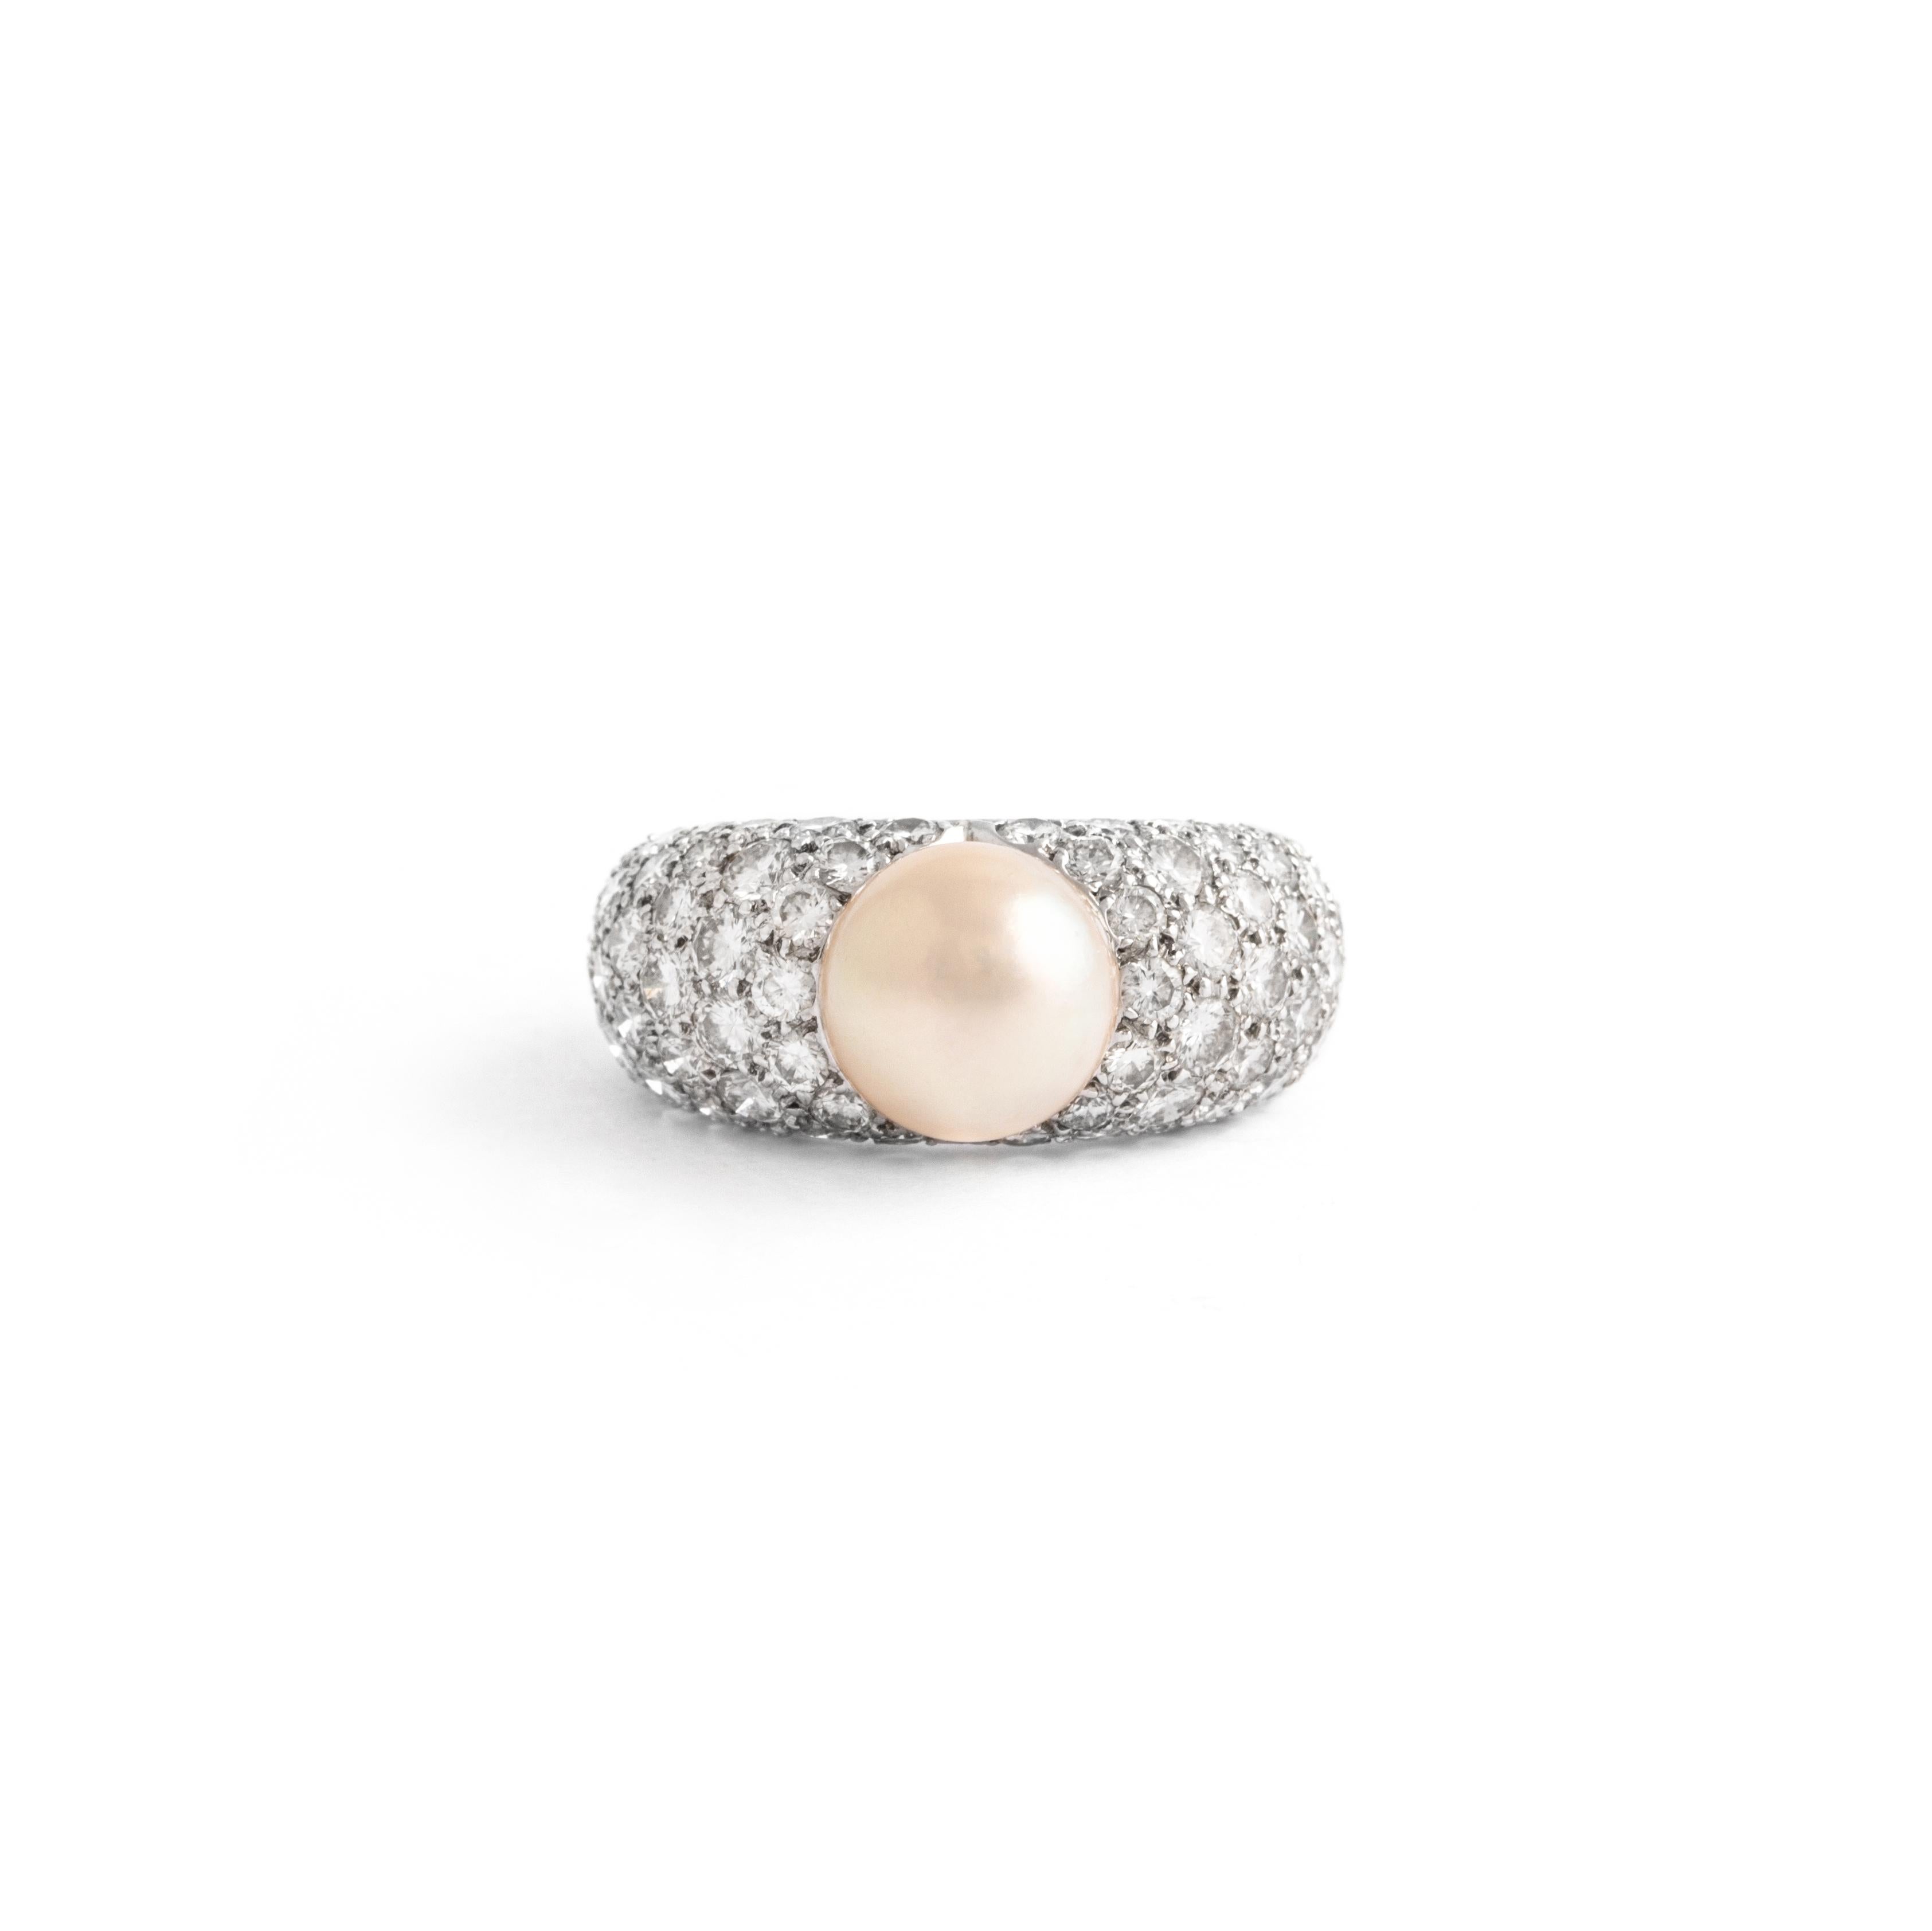 Cartier Juliette collection. Pearl Diamonds 18K White Gold Ring.
Design of the ring is heart shaped.

Signed Cartier. Numbered and marked.

Diamond total weight: approximately 3.00 carats.
Total weight: approximately 10.16 grams.
Cultured Pearl